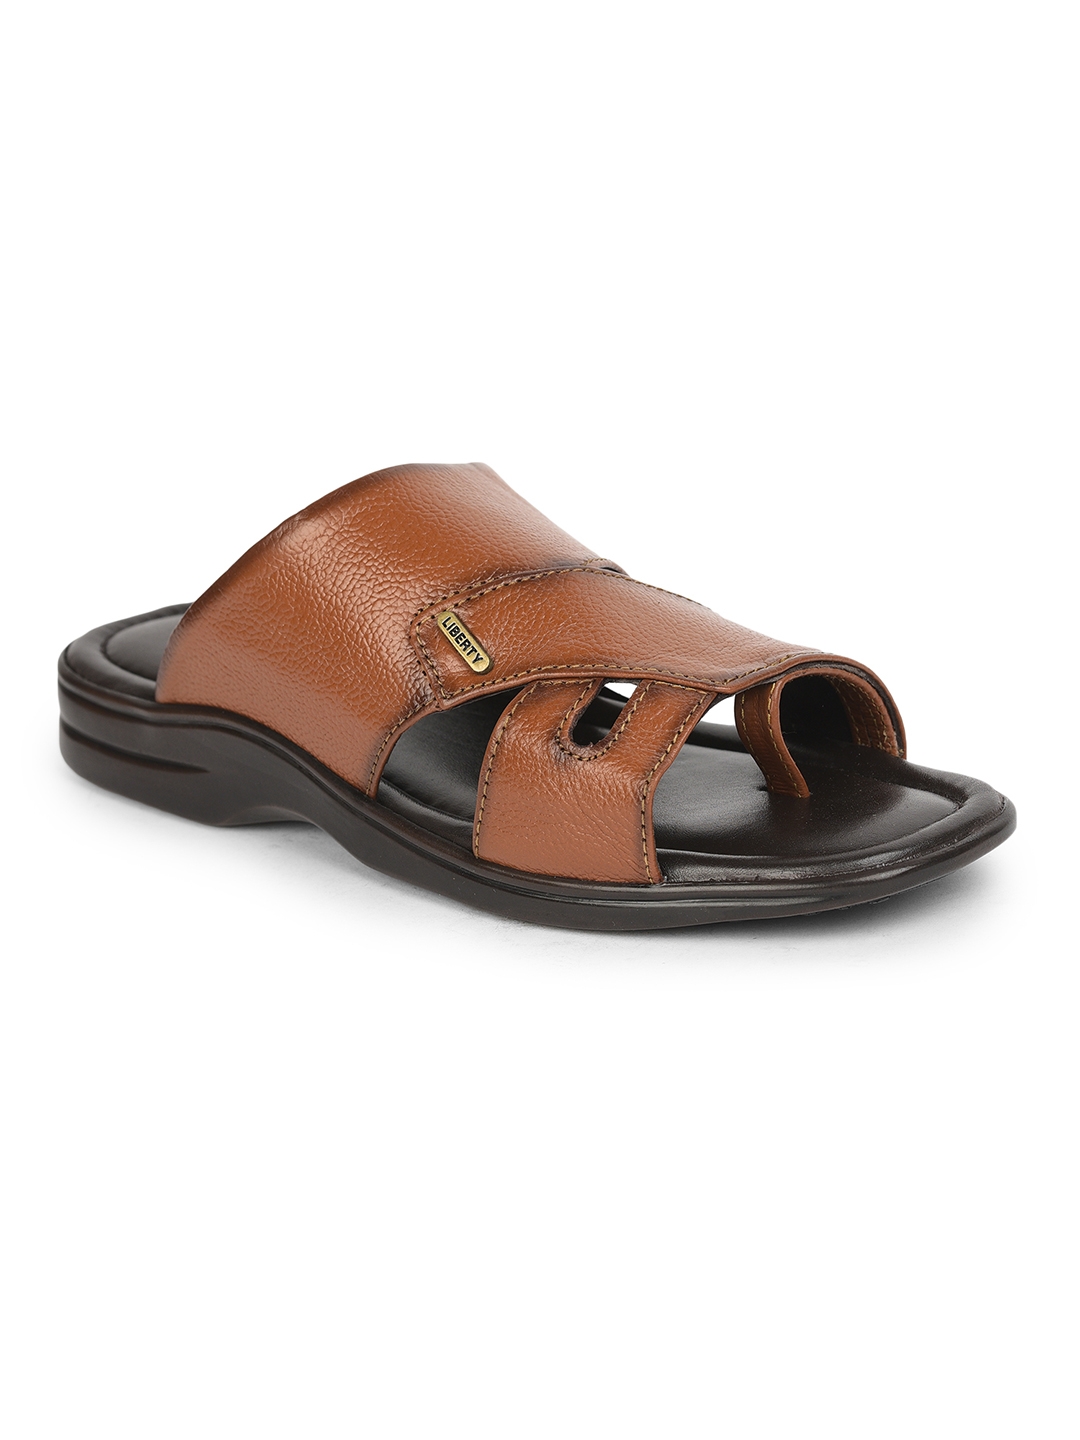 Liberty | Coolers by Liberty Brown Slippers COSTA-92 For :- Men